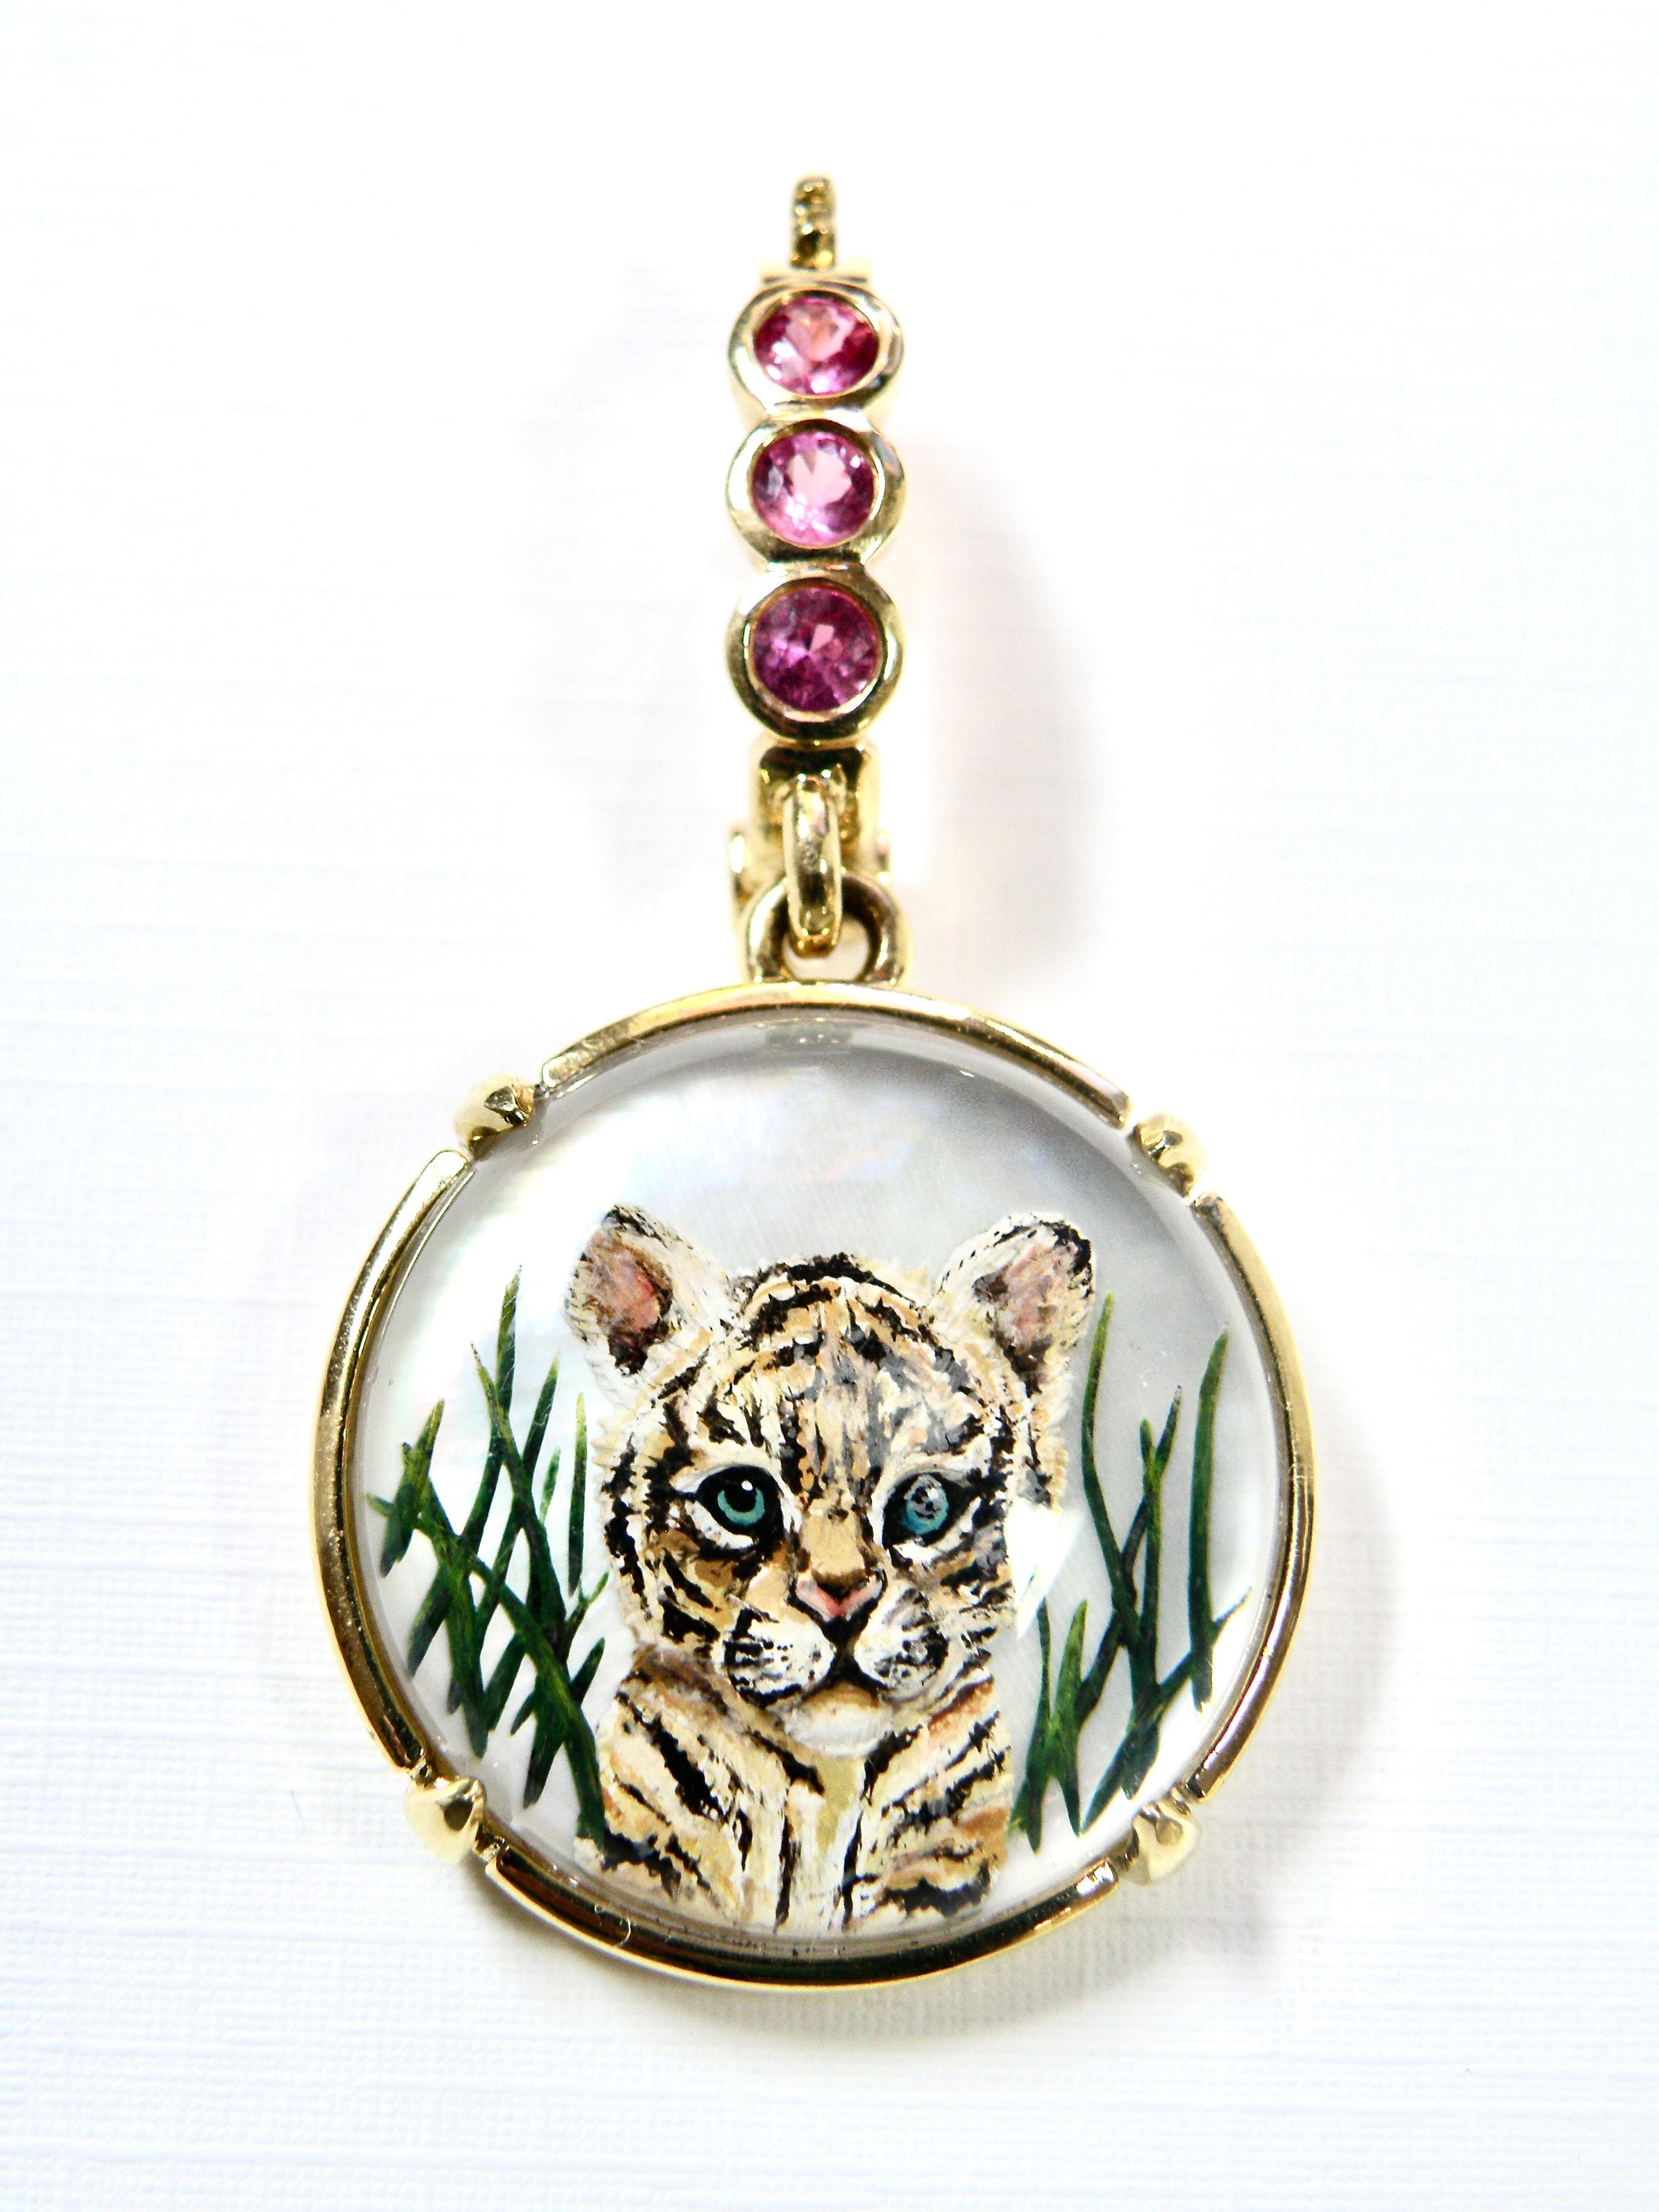 18K Lion pendant hand painted reverse quartz crystal backed with mothher of pearl hand painted by Master Carver from Idar Oberstein 14mm round